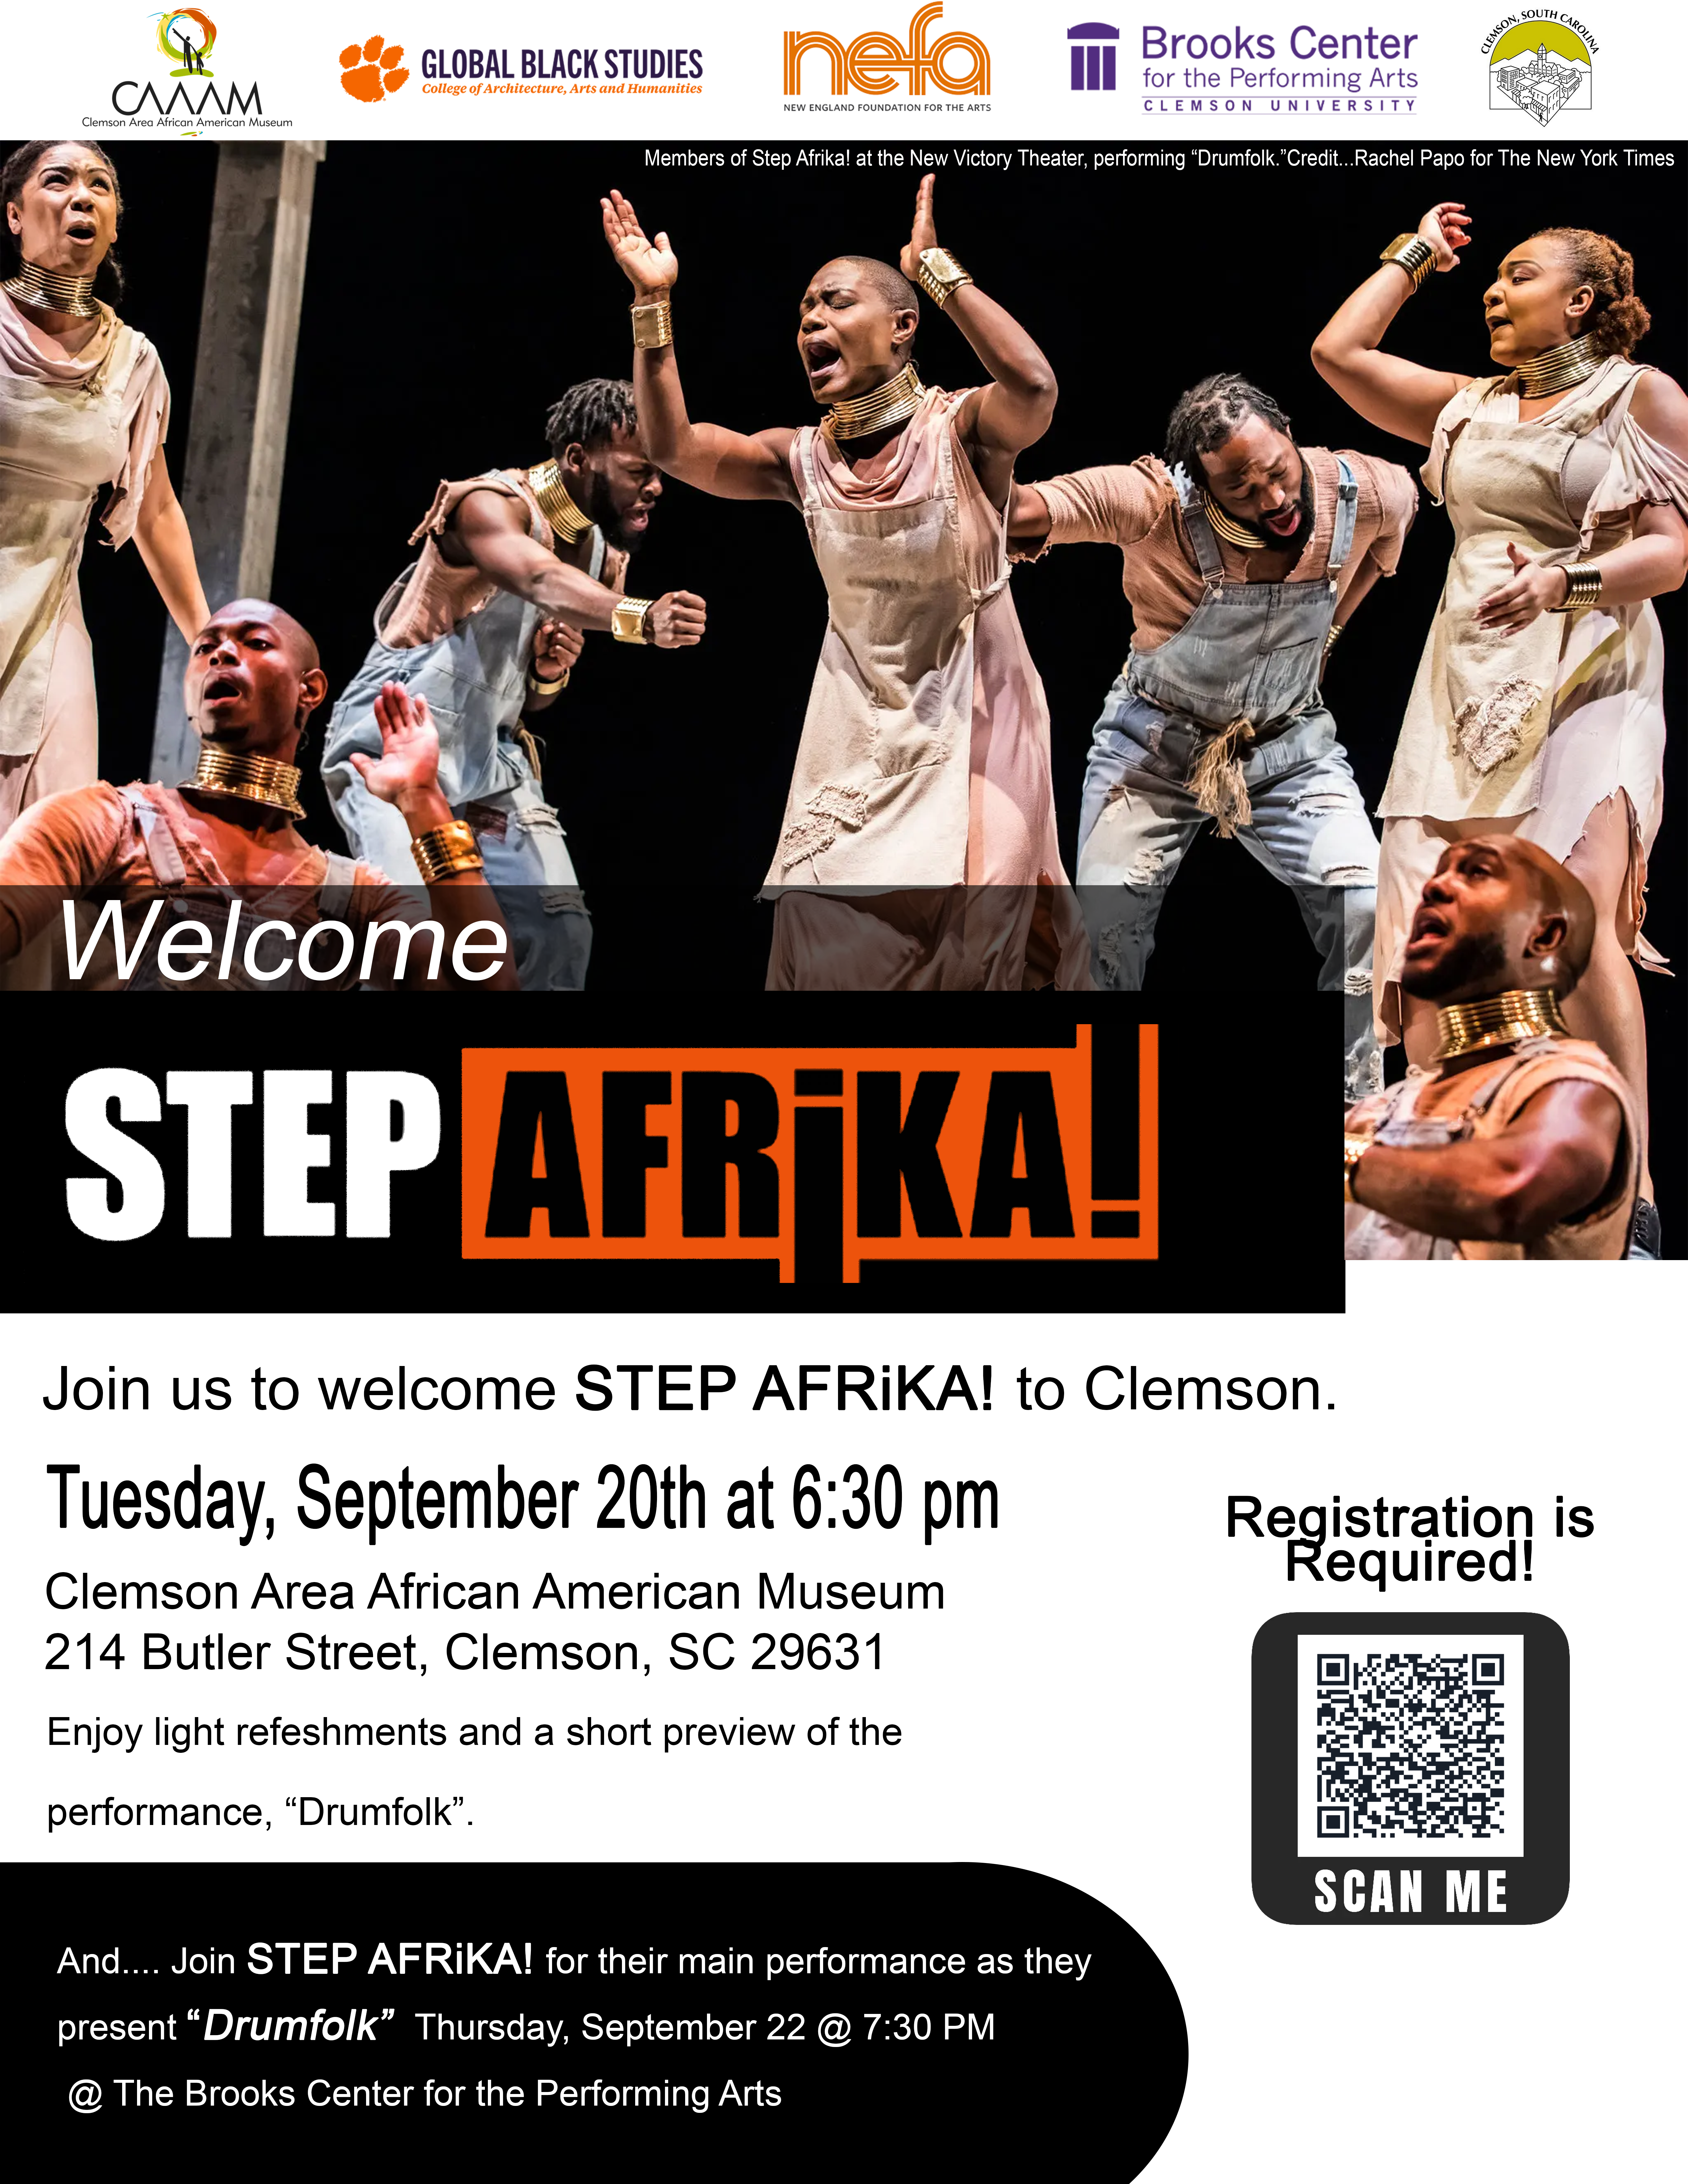 Welcome Step Afrika Tuesday, September 20th